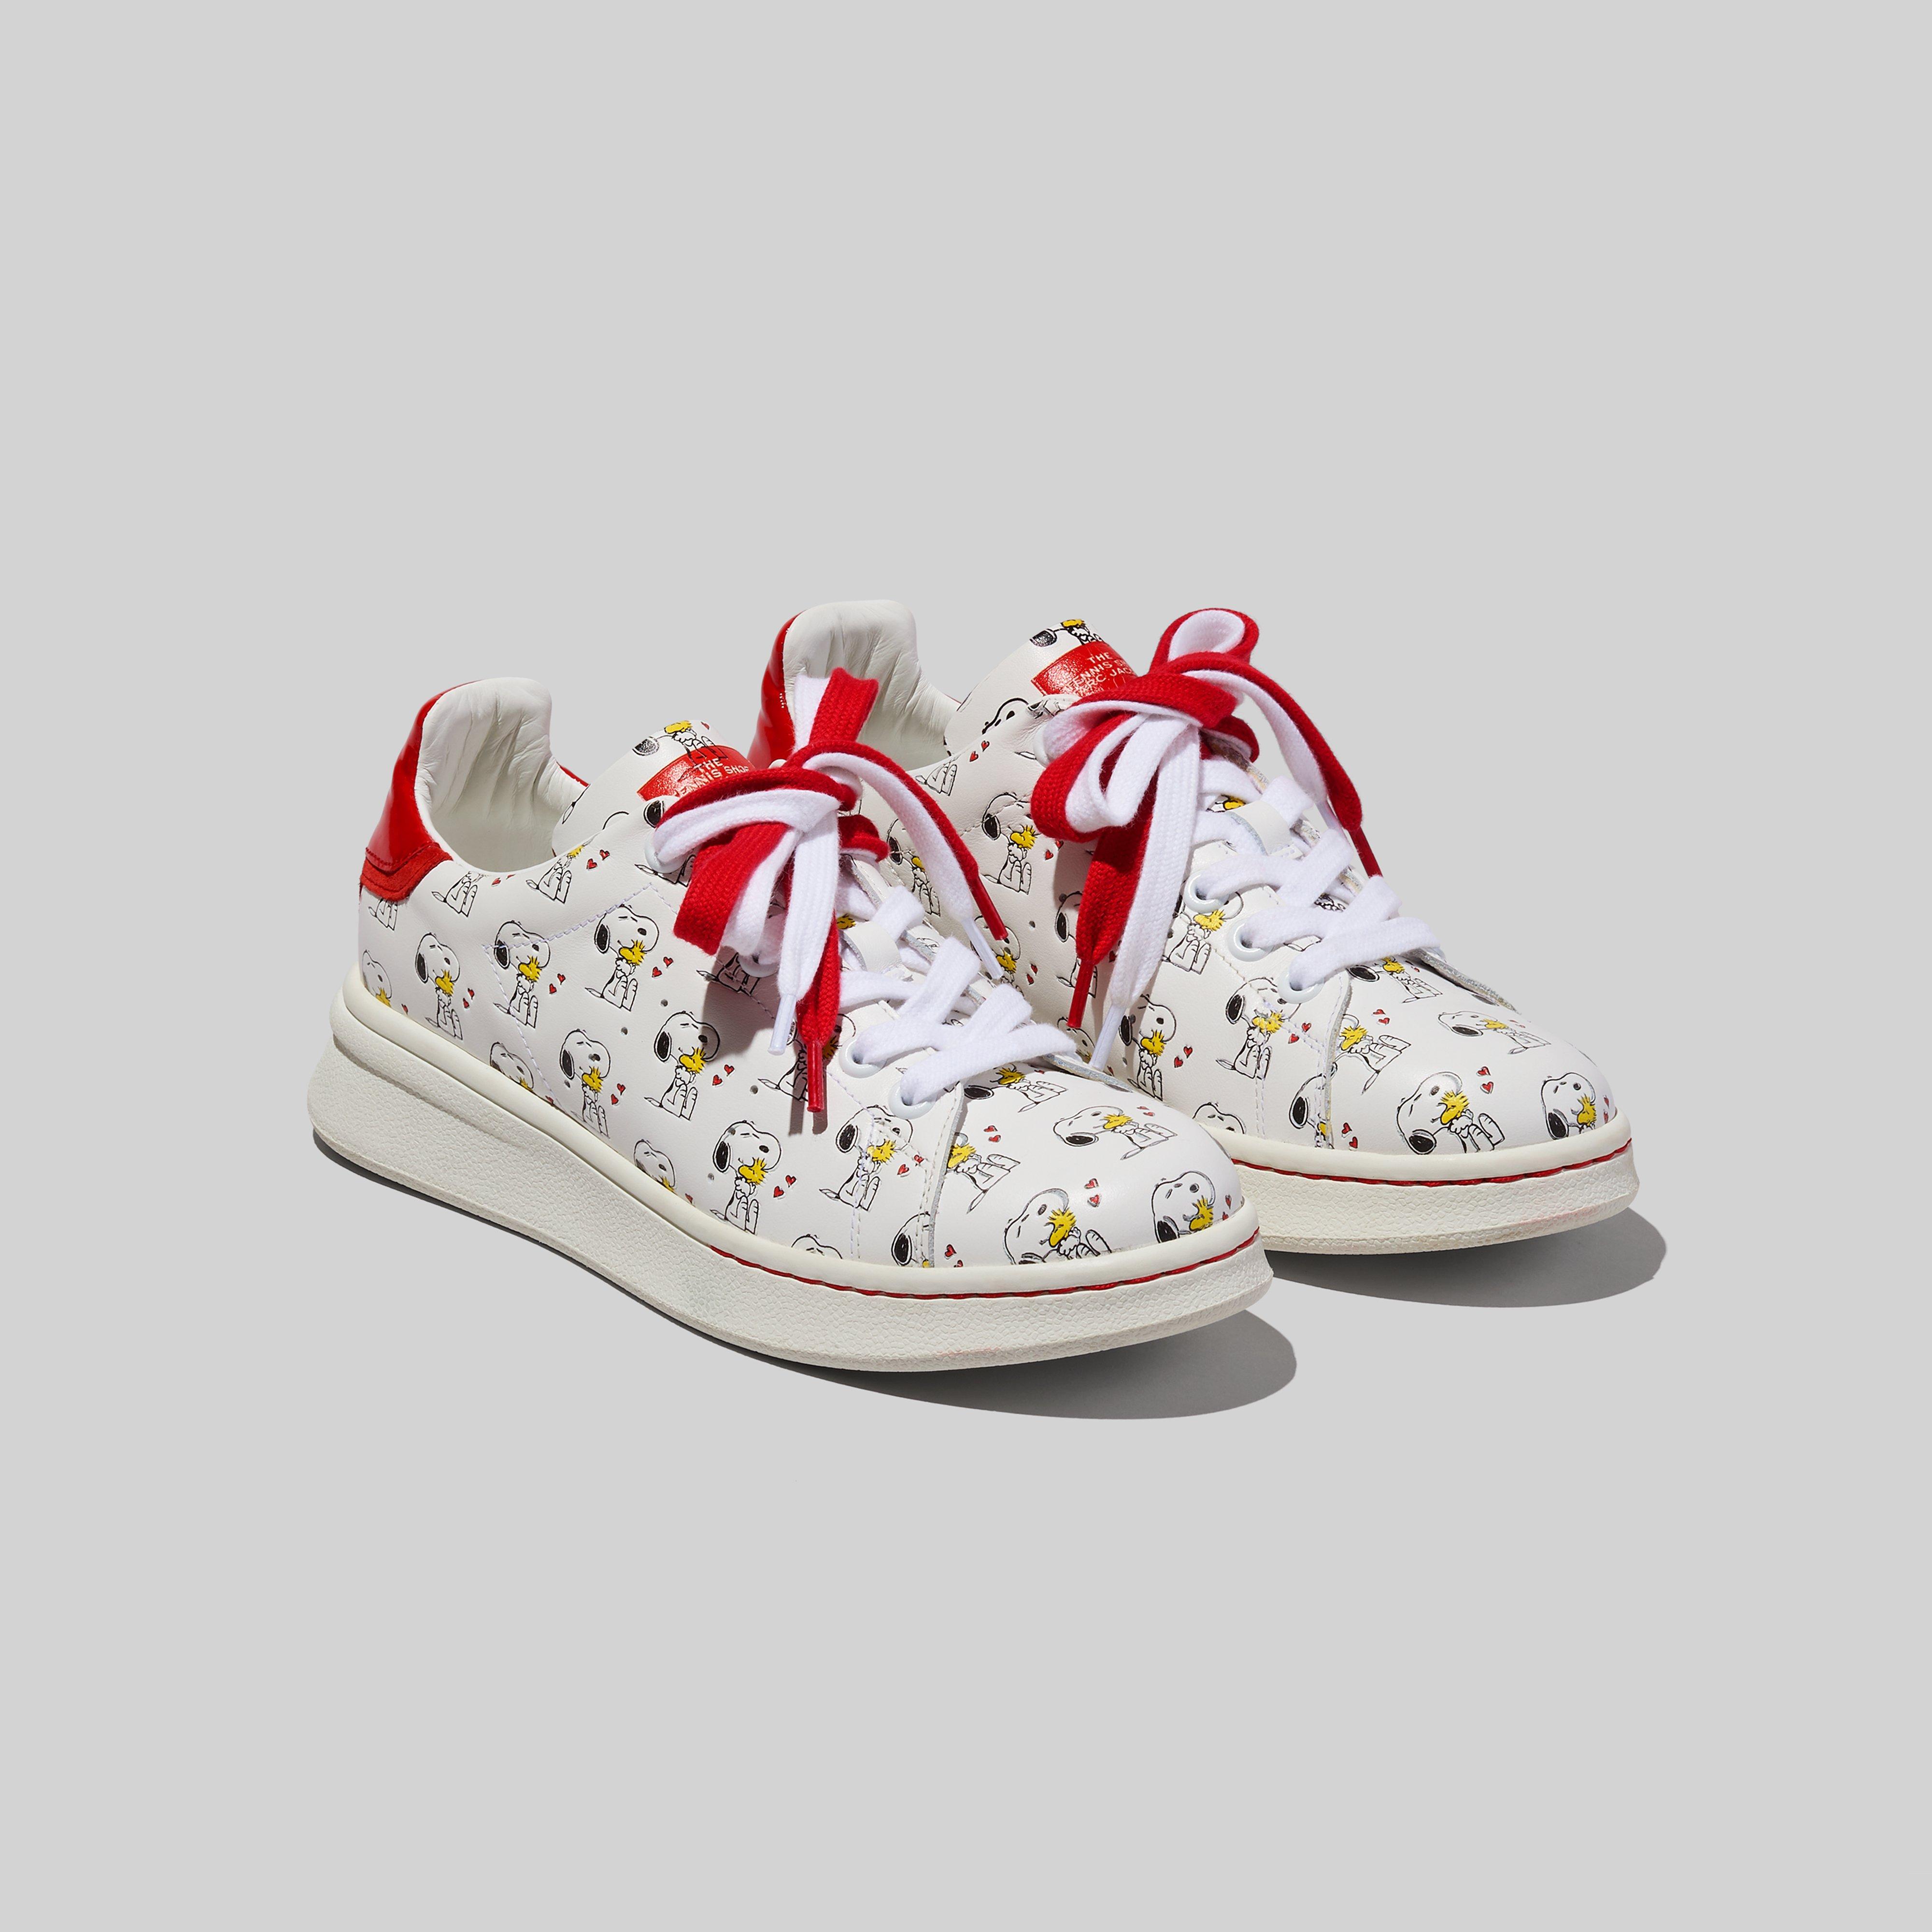 marc jacobs snoopy shoes